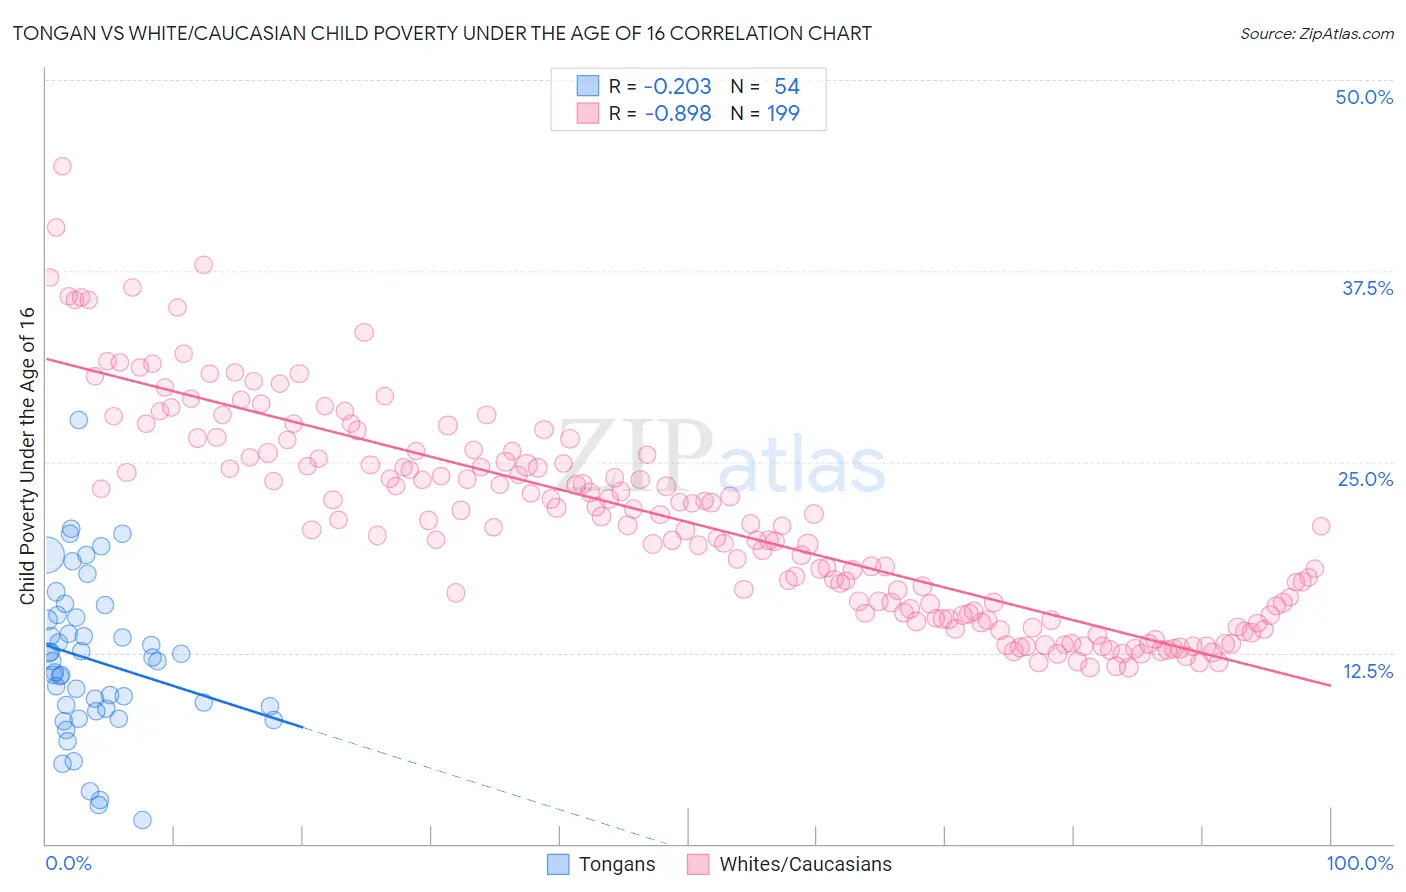 Tongan vs White/Caucasian Child Poverty Under the Age of 16